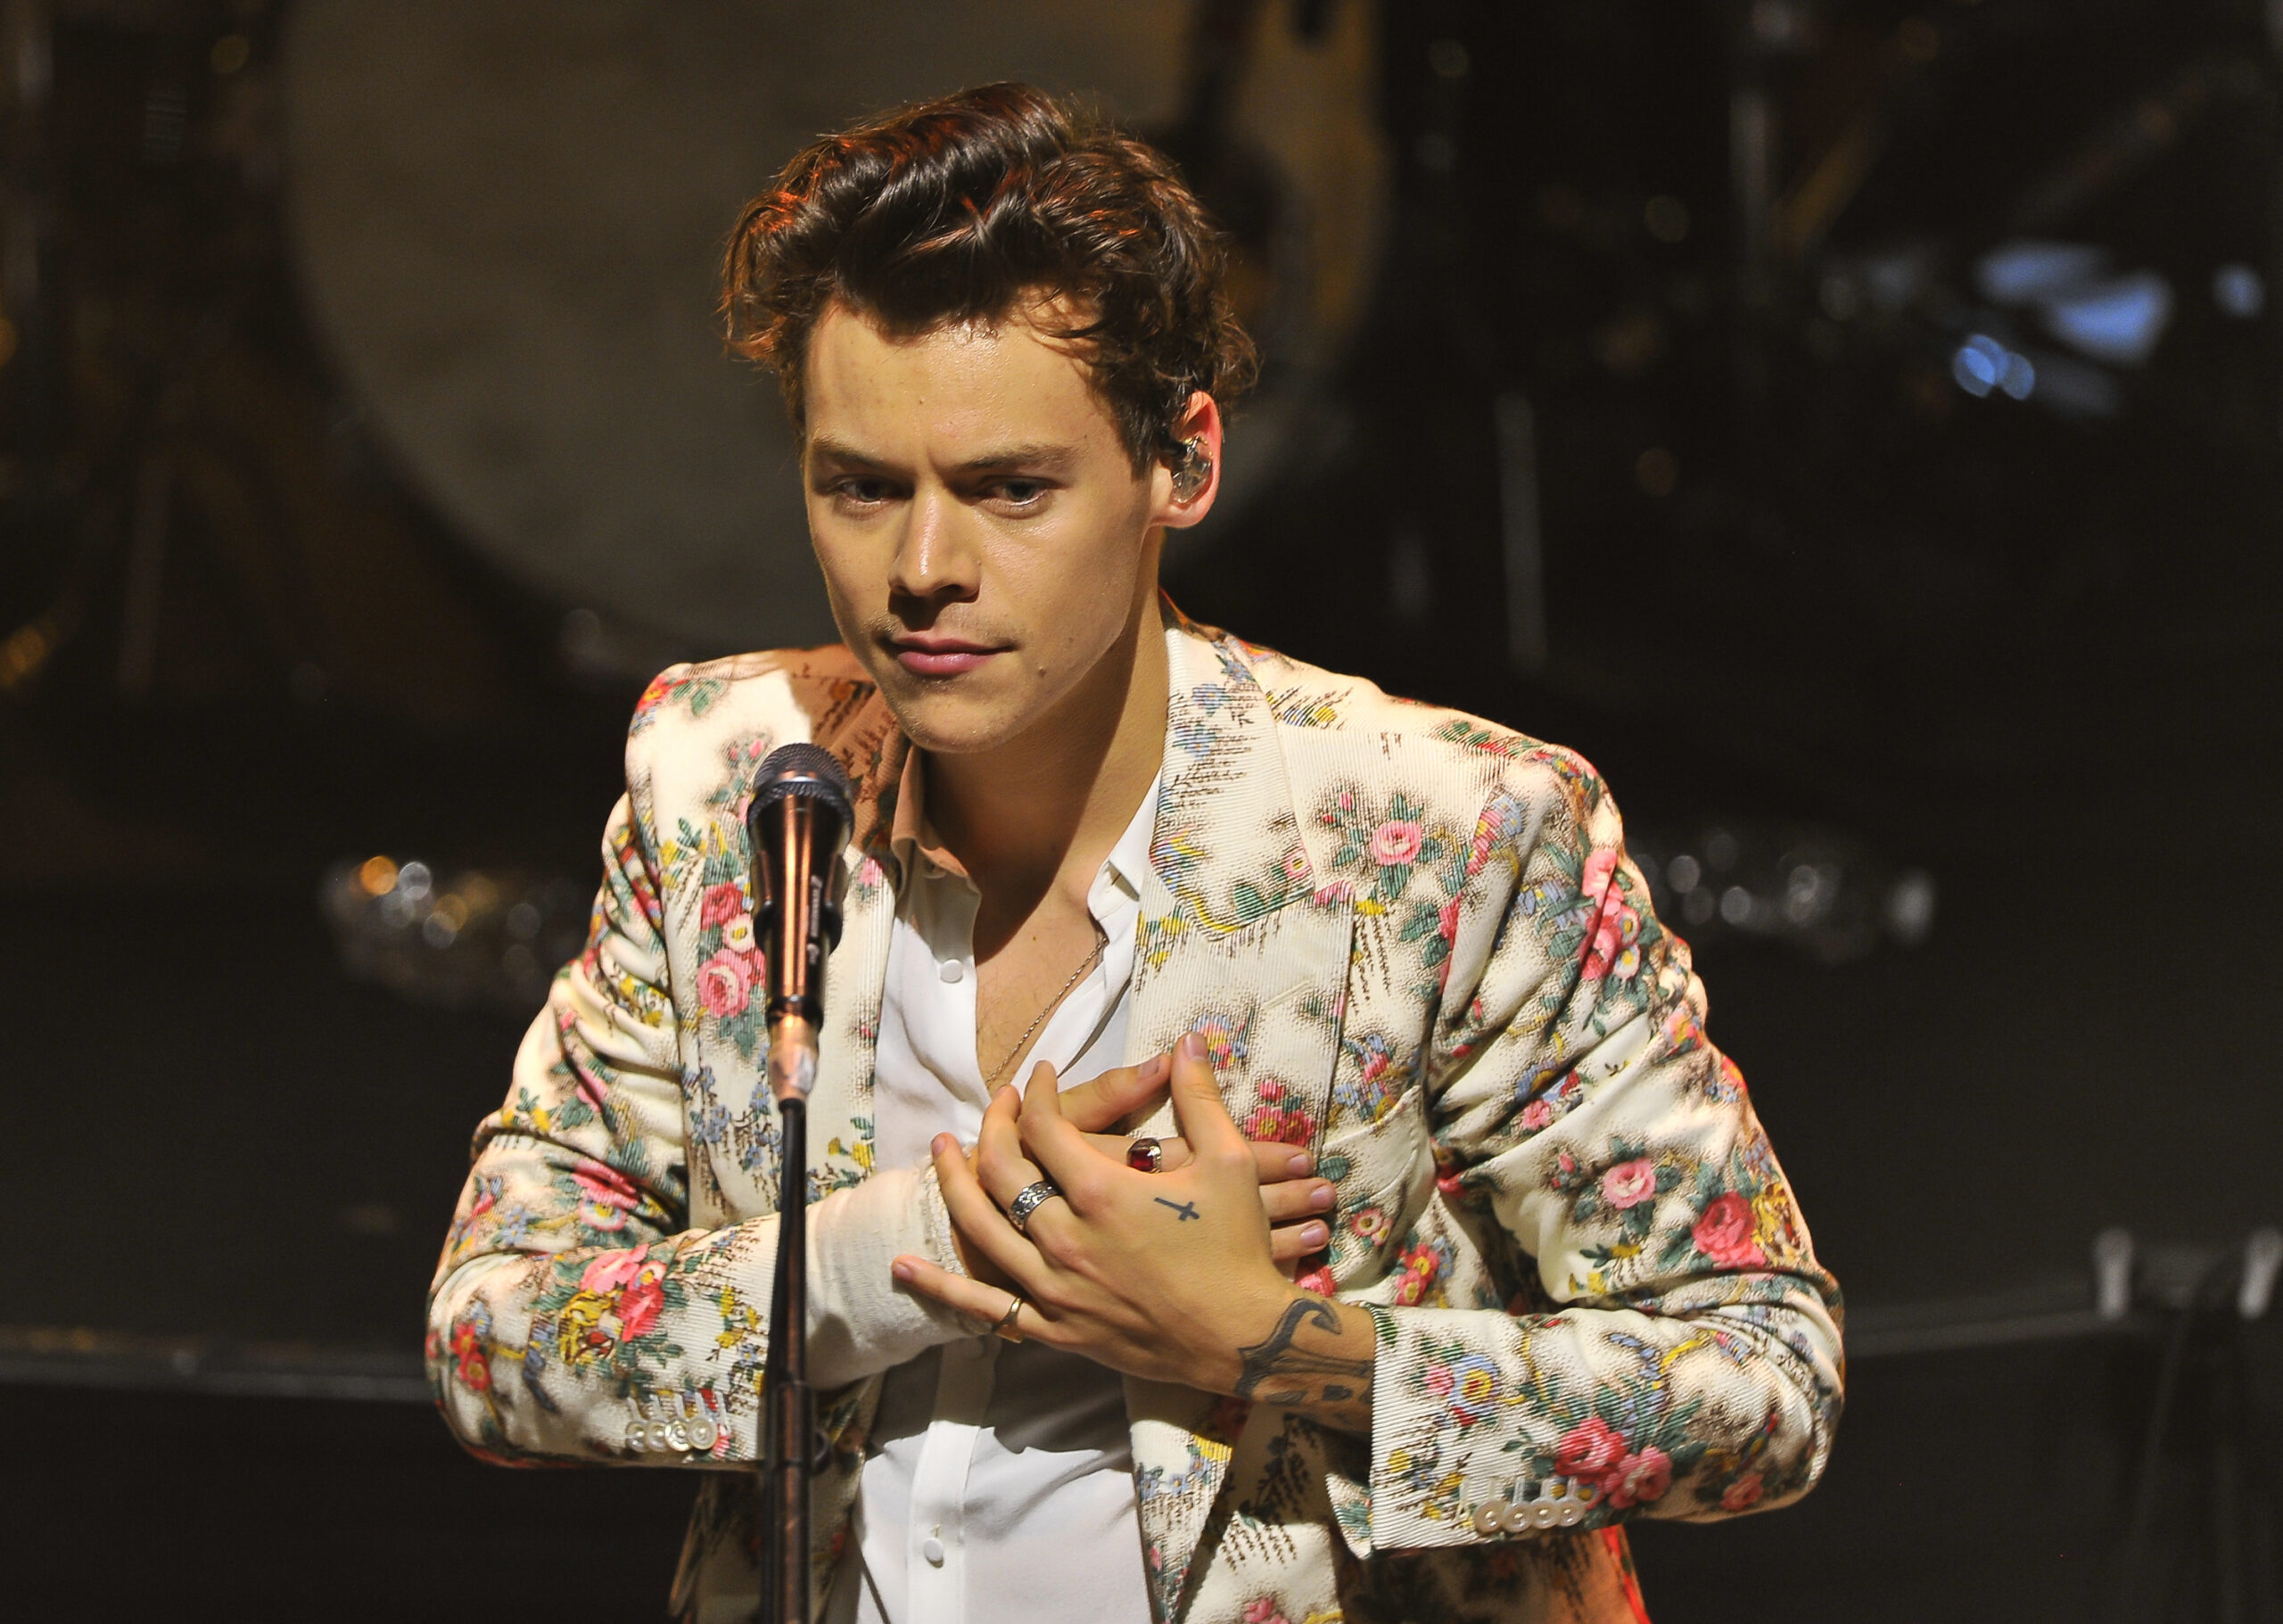 Harry Styles honours “strong women” at concert in Texas